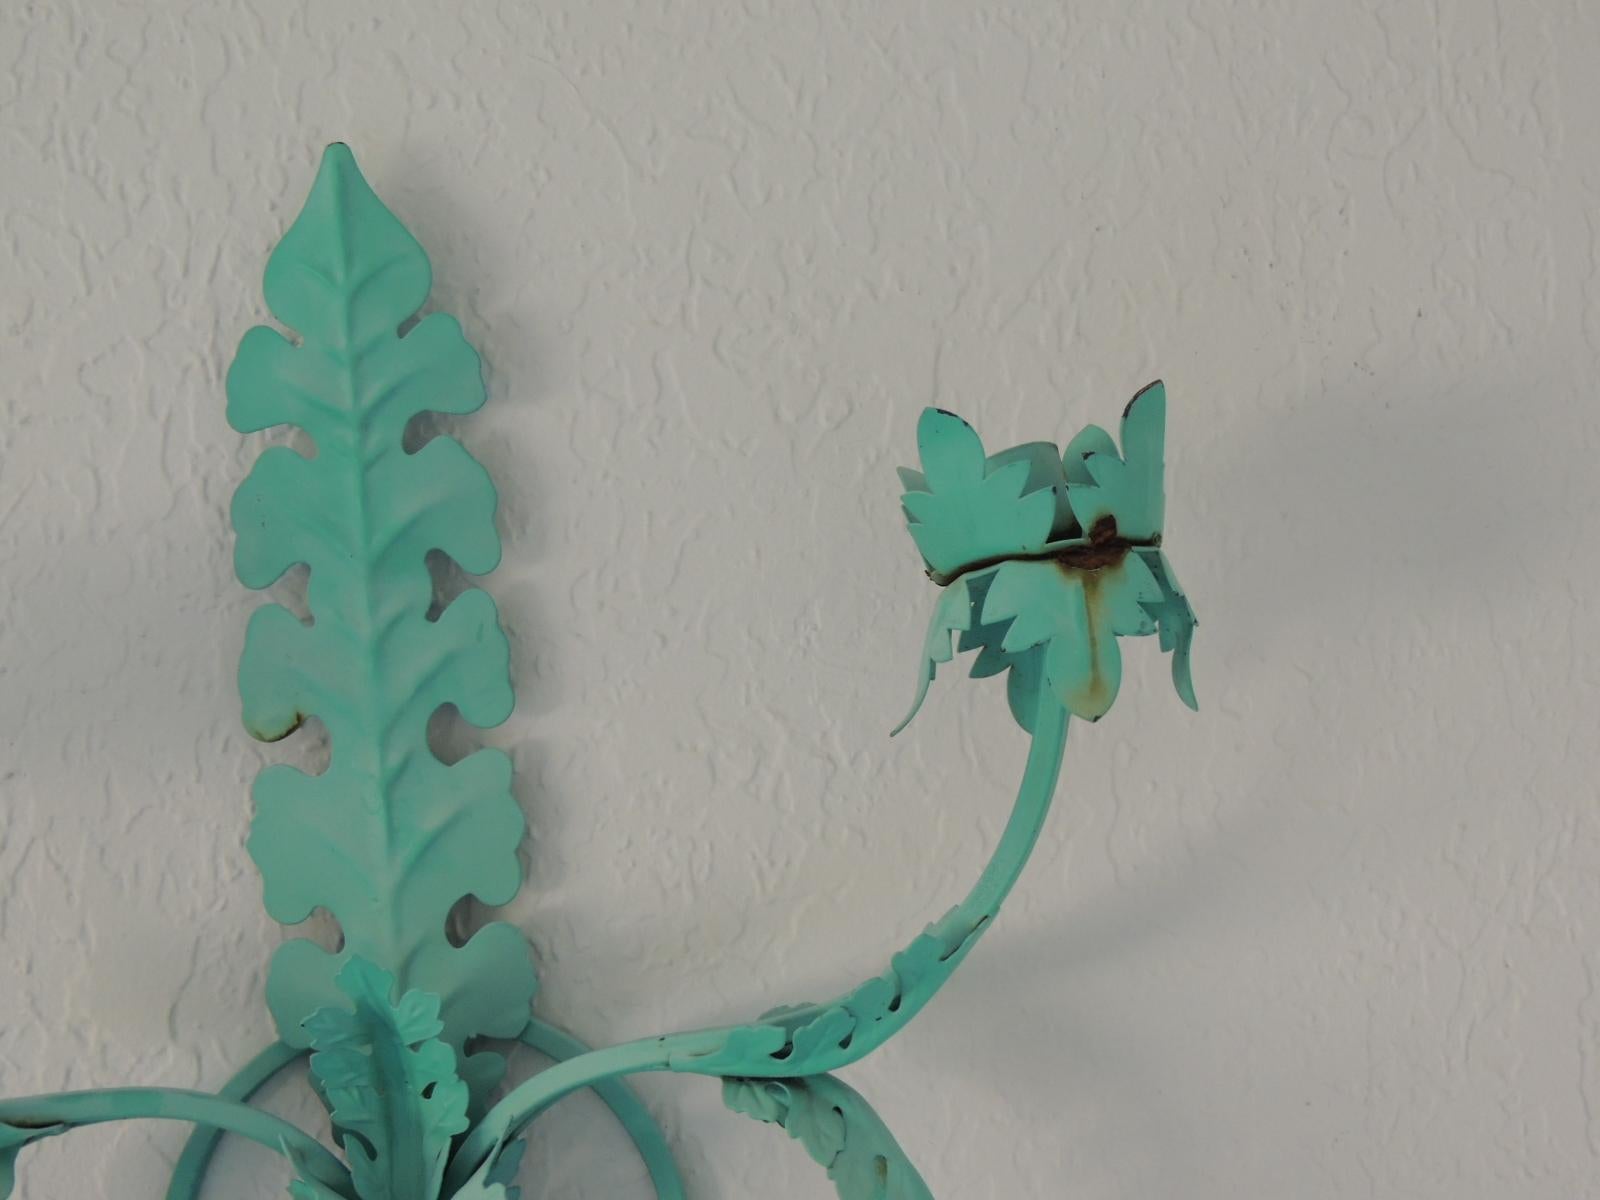 Aqua green large wall candle aconce.
Two candle light holder with Acanthus leaves.
Painted metal wall sconce.
Found in New Orleans.
Hanging hook in the back.
Size: 27.5